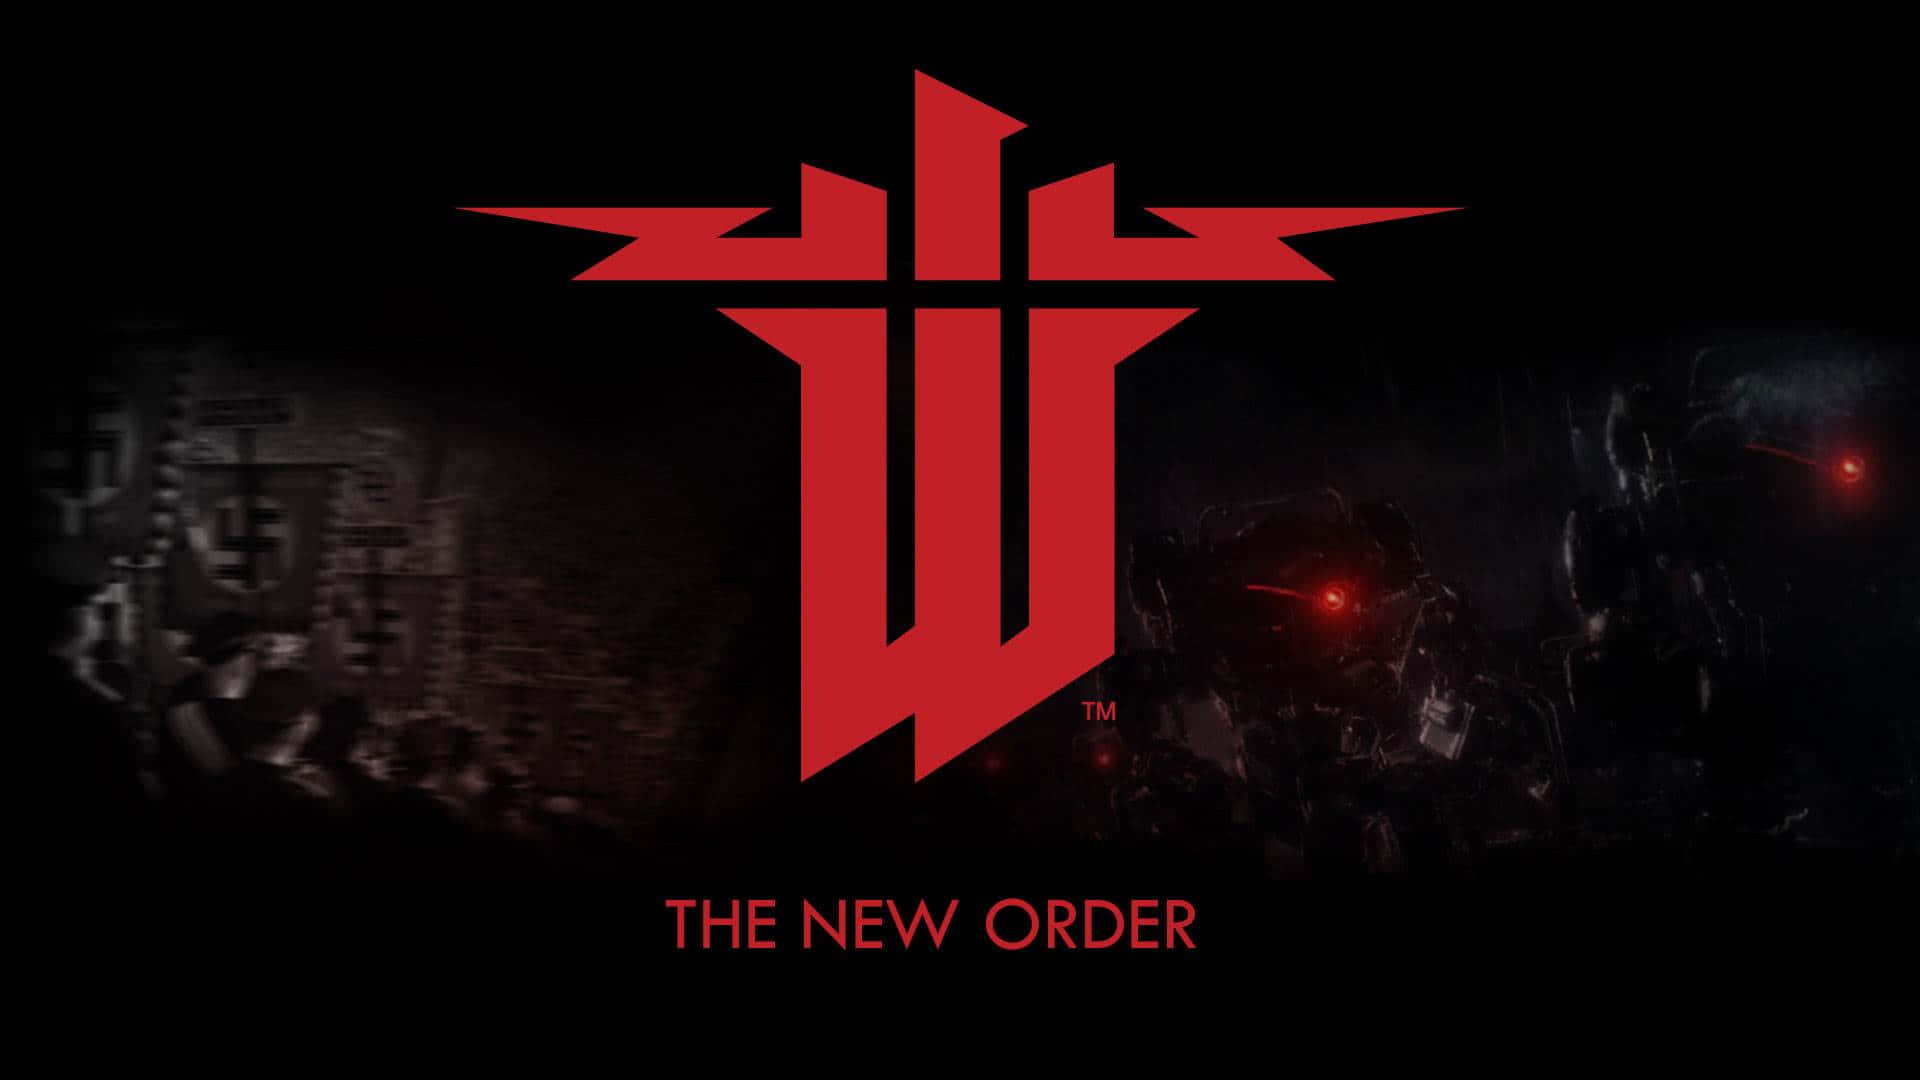 The New Order Logo With Red Lights